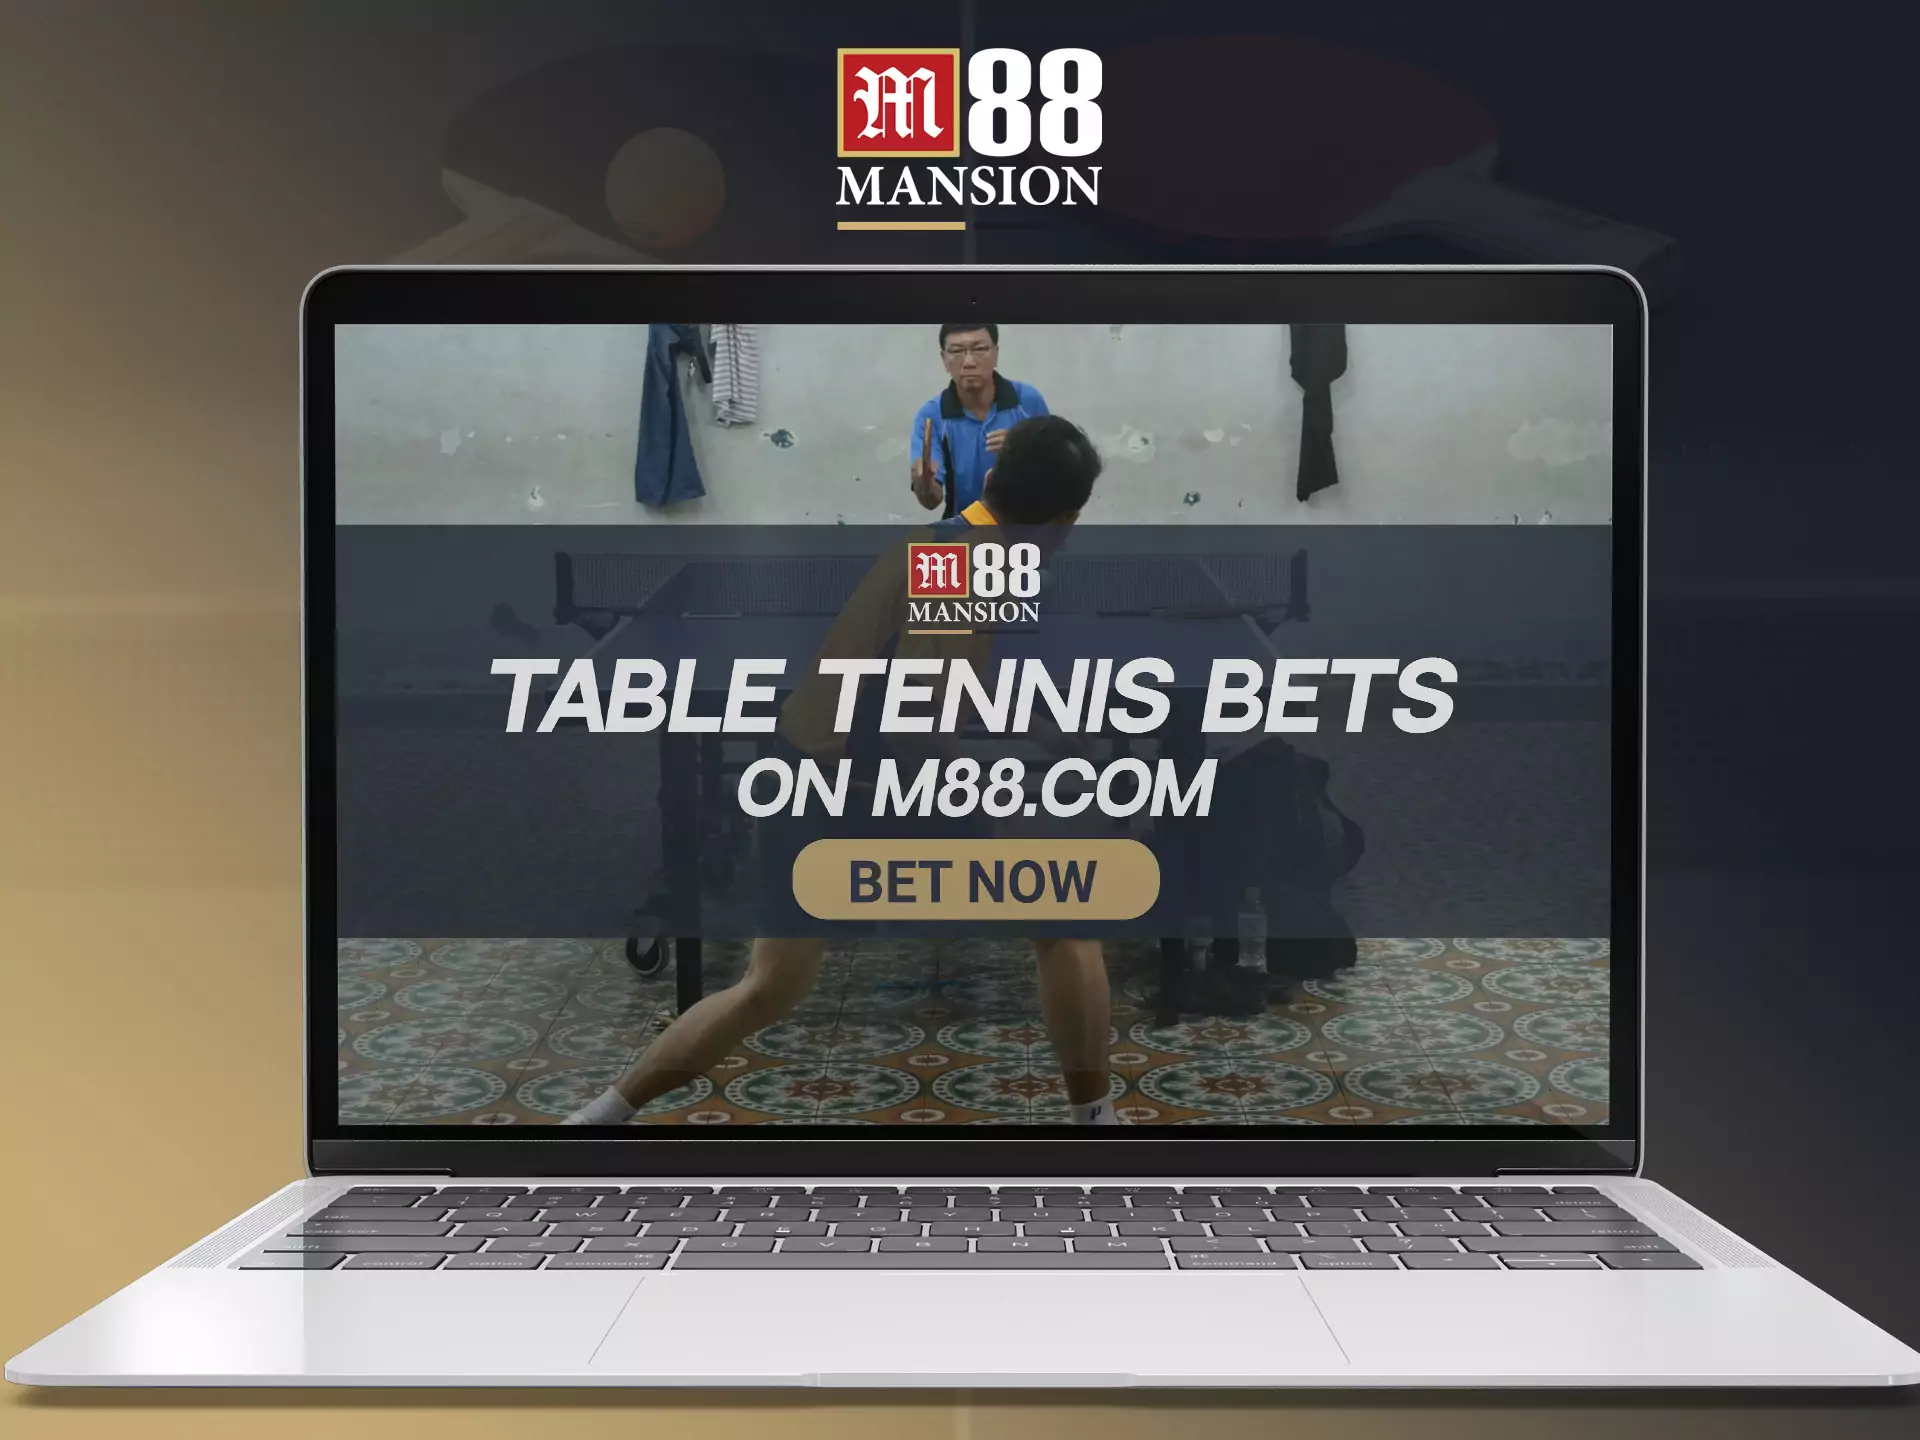 Also, you can place bets on table tennis tournaments.